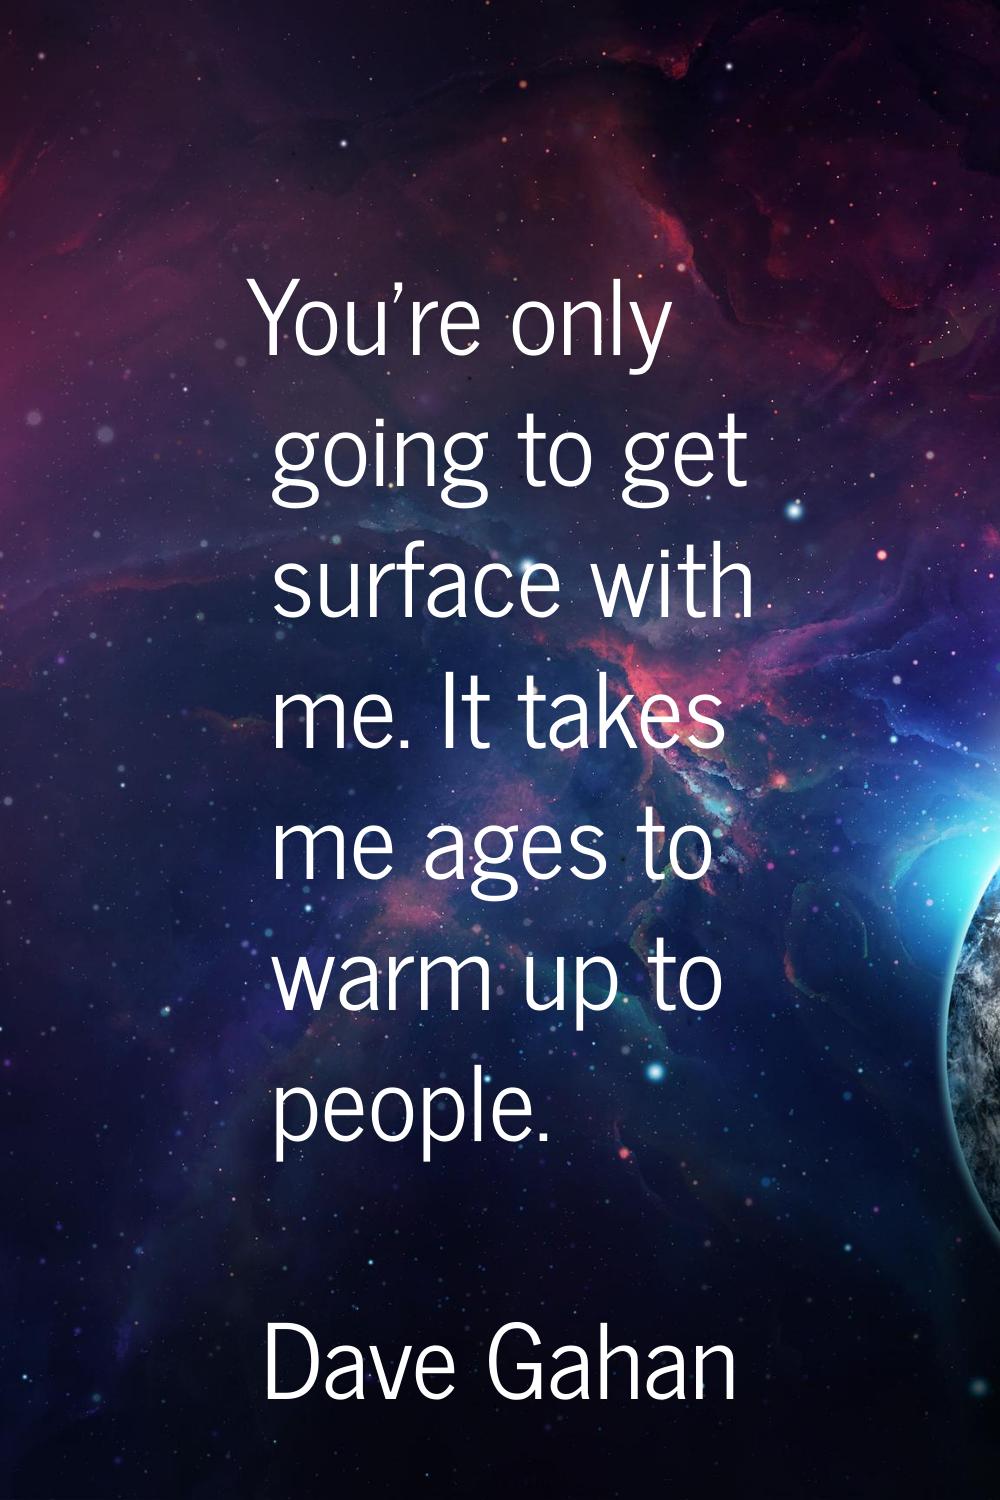 You're only going to get surface with me. It takes me ages to warm up to people.